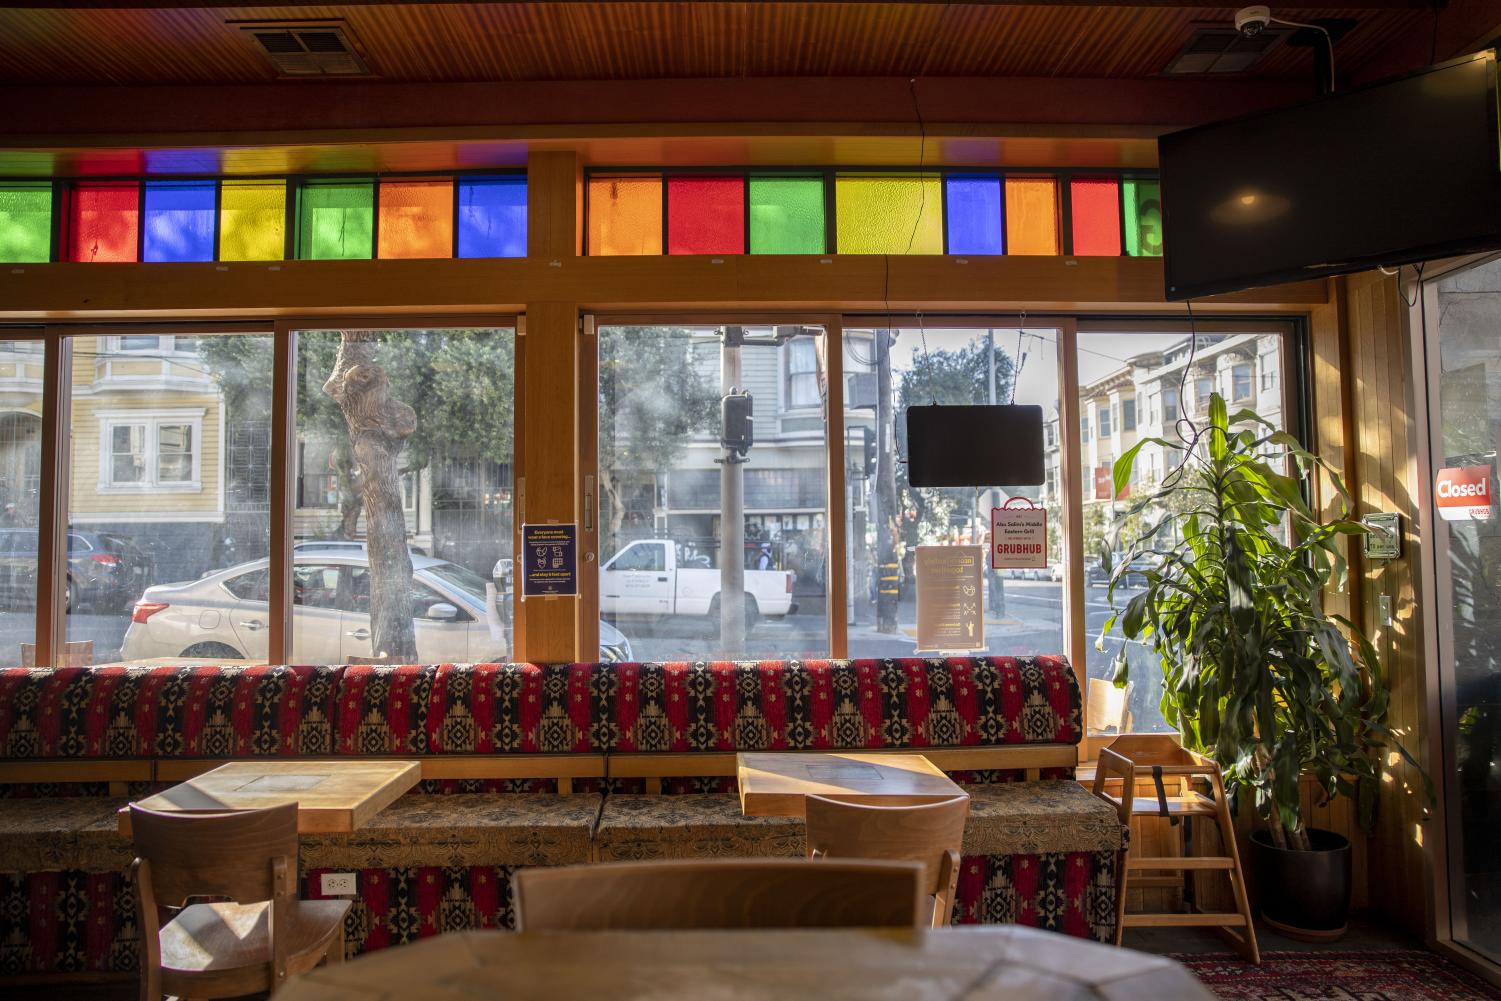 SF+family+opens+new+Palestinian+restaurant+after+fire+at+Mission+location